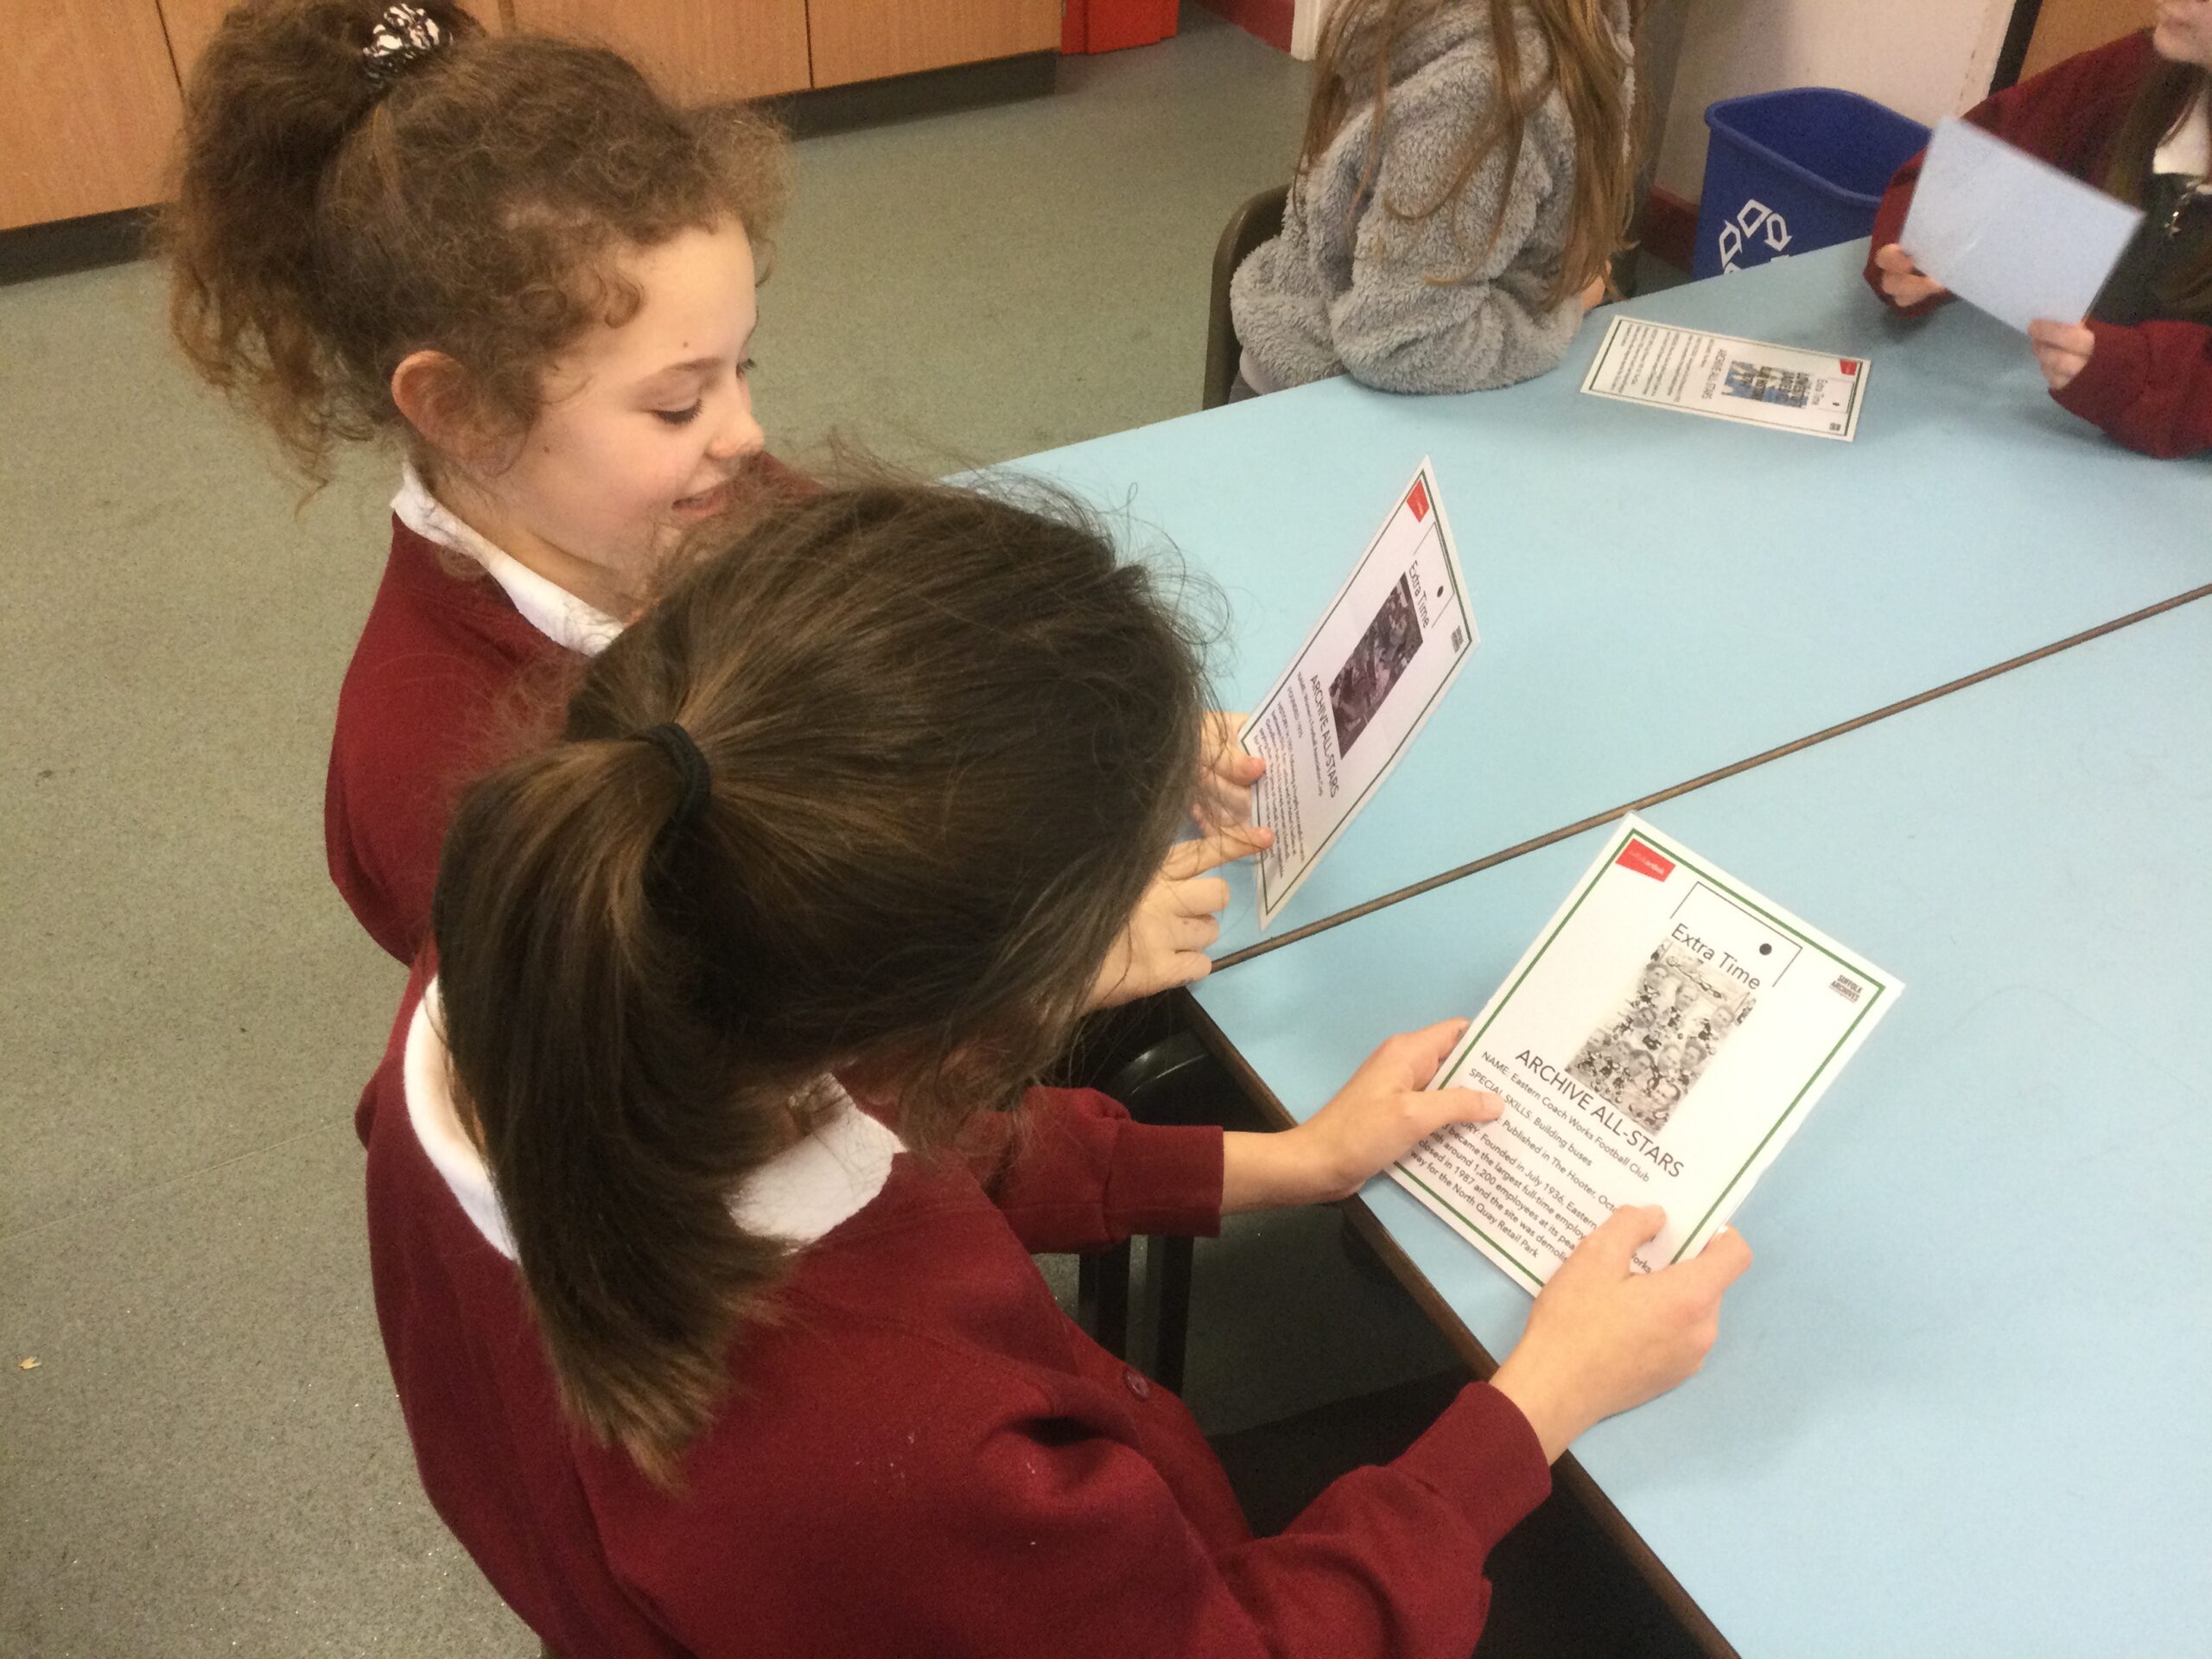 Two school girls studying laminated cards showing details about Lowestoft football clubs